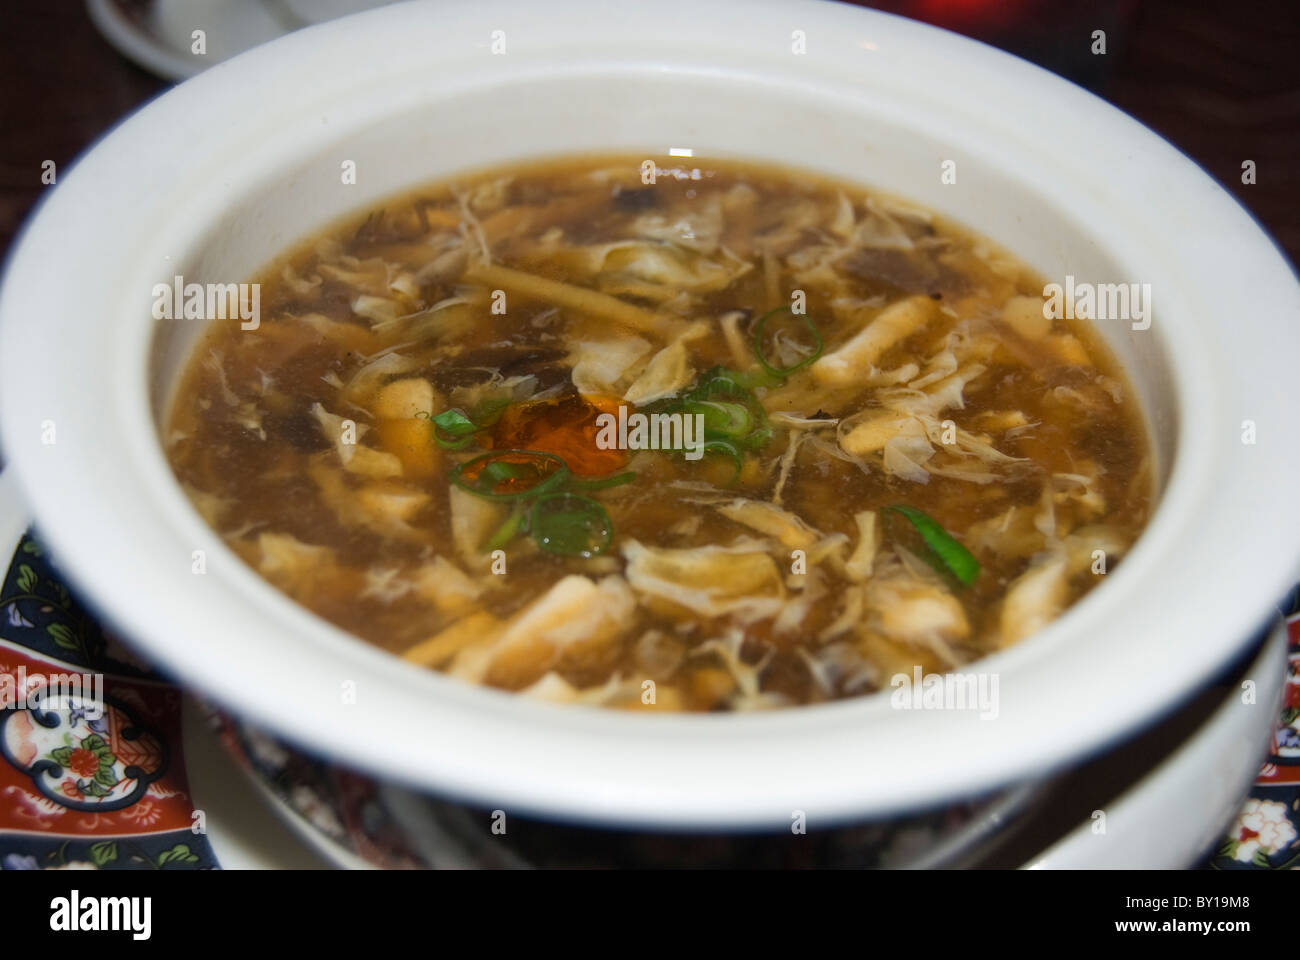 Hot and sour Sichuan soup in an authentic restaurant in Hong Kong Stock Photo